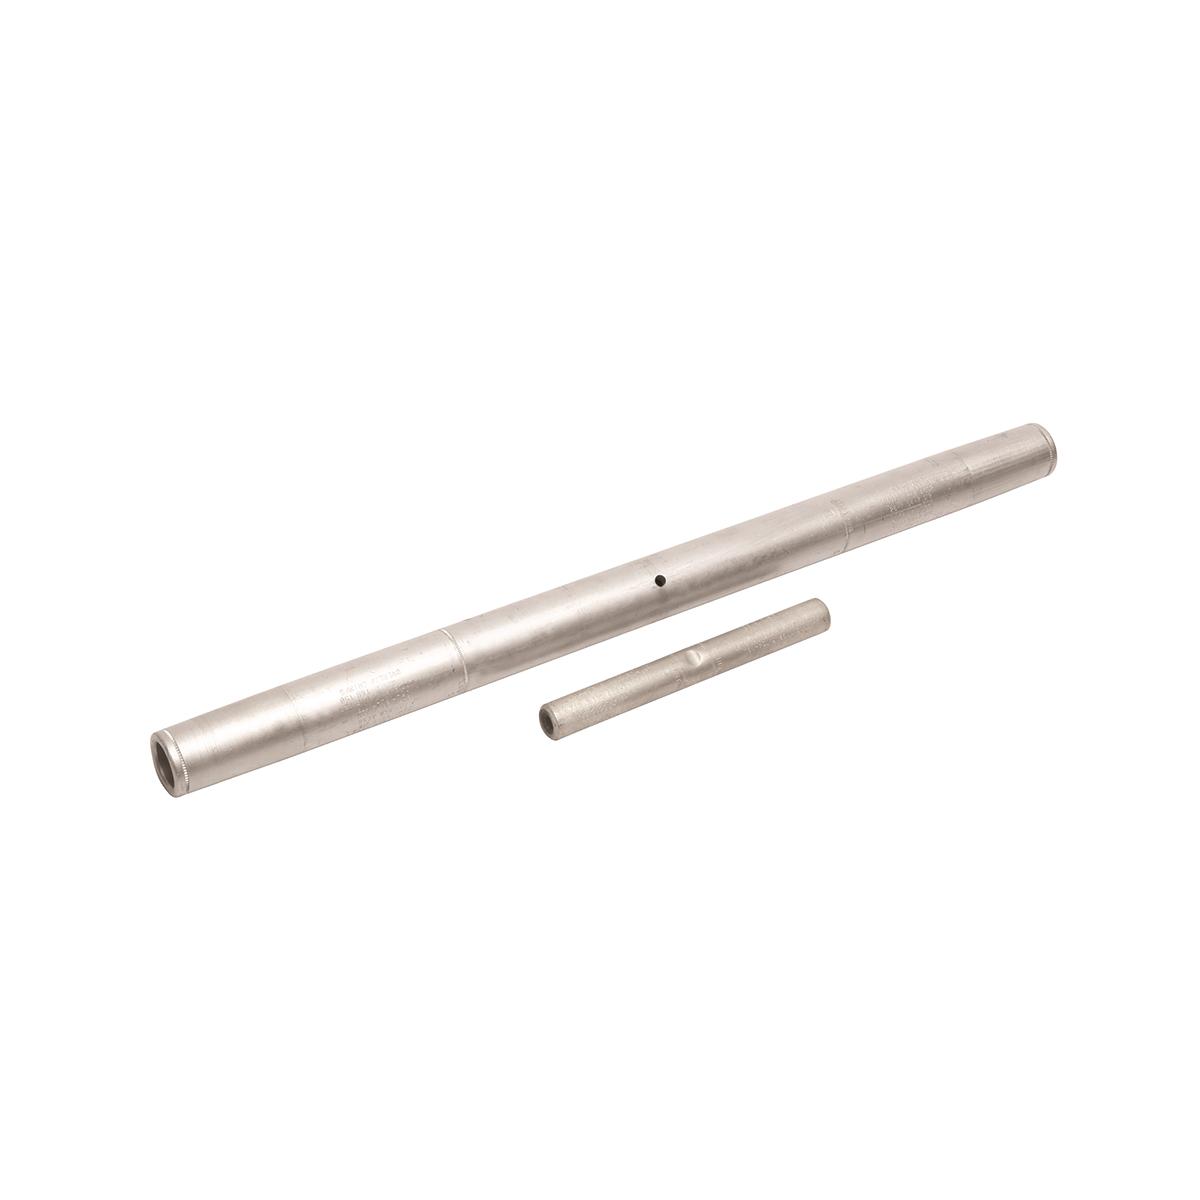 Hubbell YTS549R Aluminum outer sleeve for full tension splice kit, 1510.5-1590 Kcmil, 729 Index, Outer sleeve for Hysplices provides gradual transition of stress. 